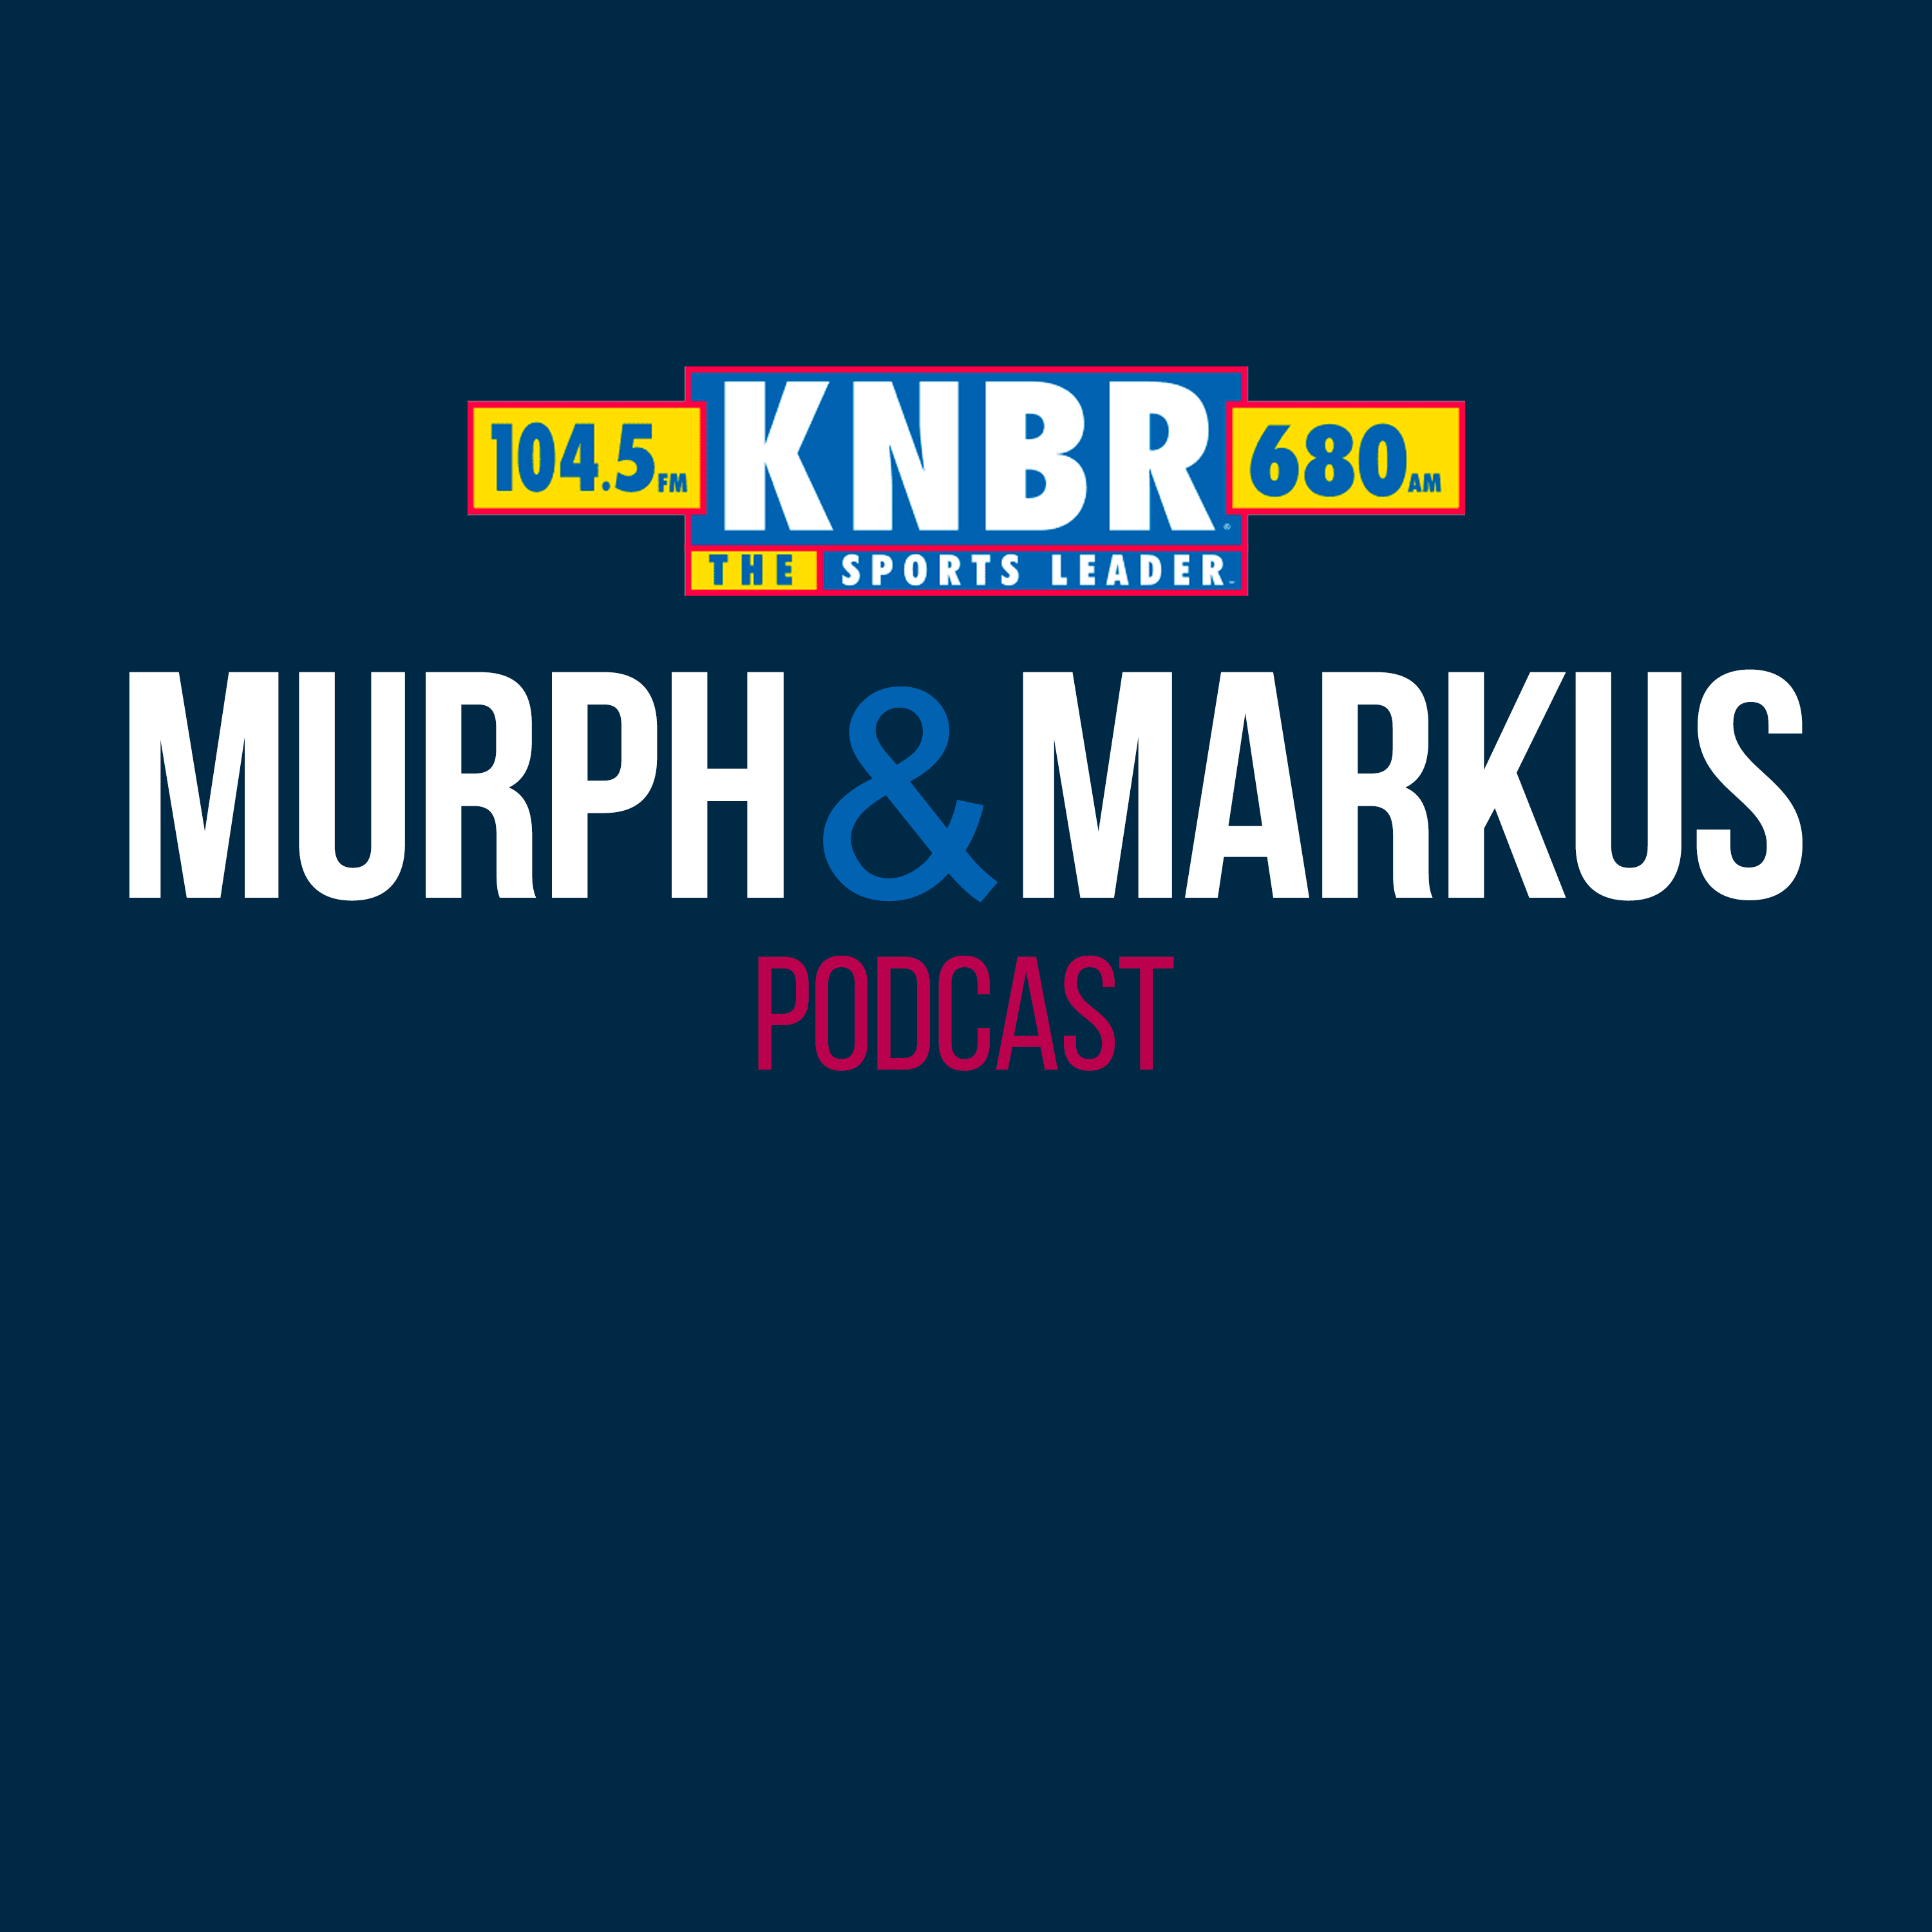 6-24 Hour 2: Murph & Markus discuss the Warriors offseason plans, talk to Mike Krukow, and get into today's top story in the Big Hit